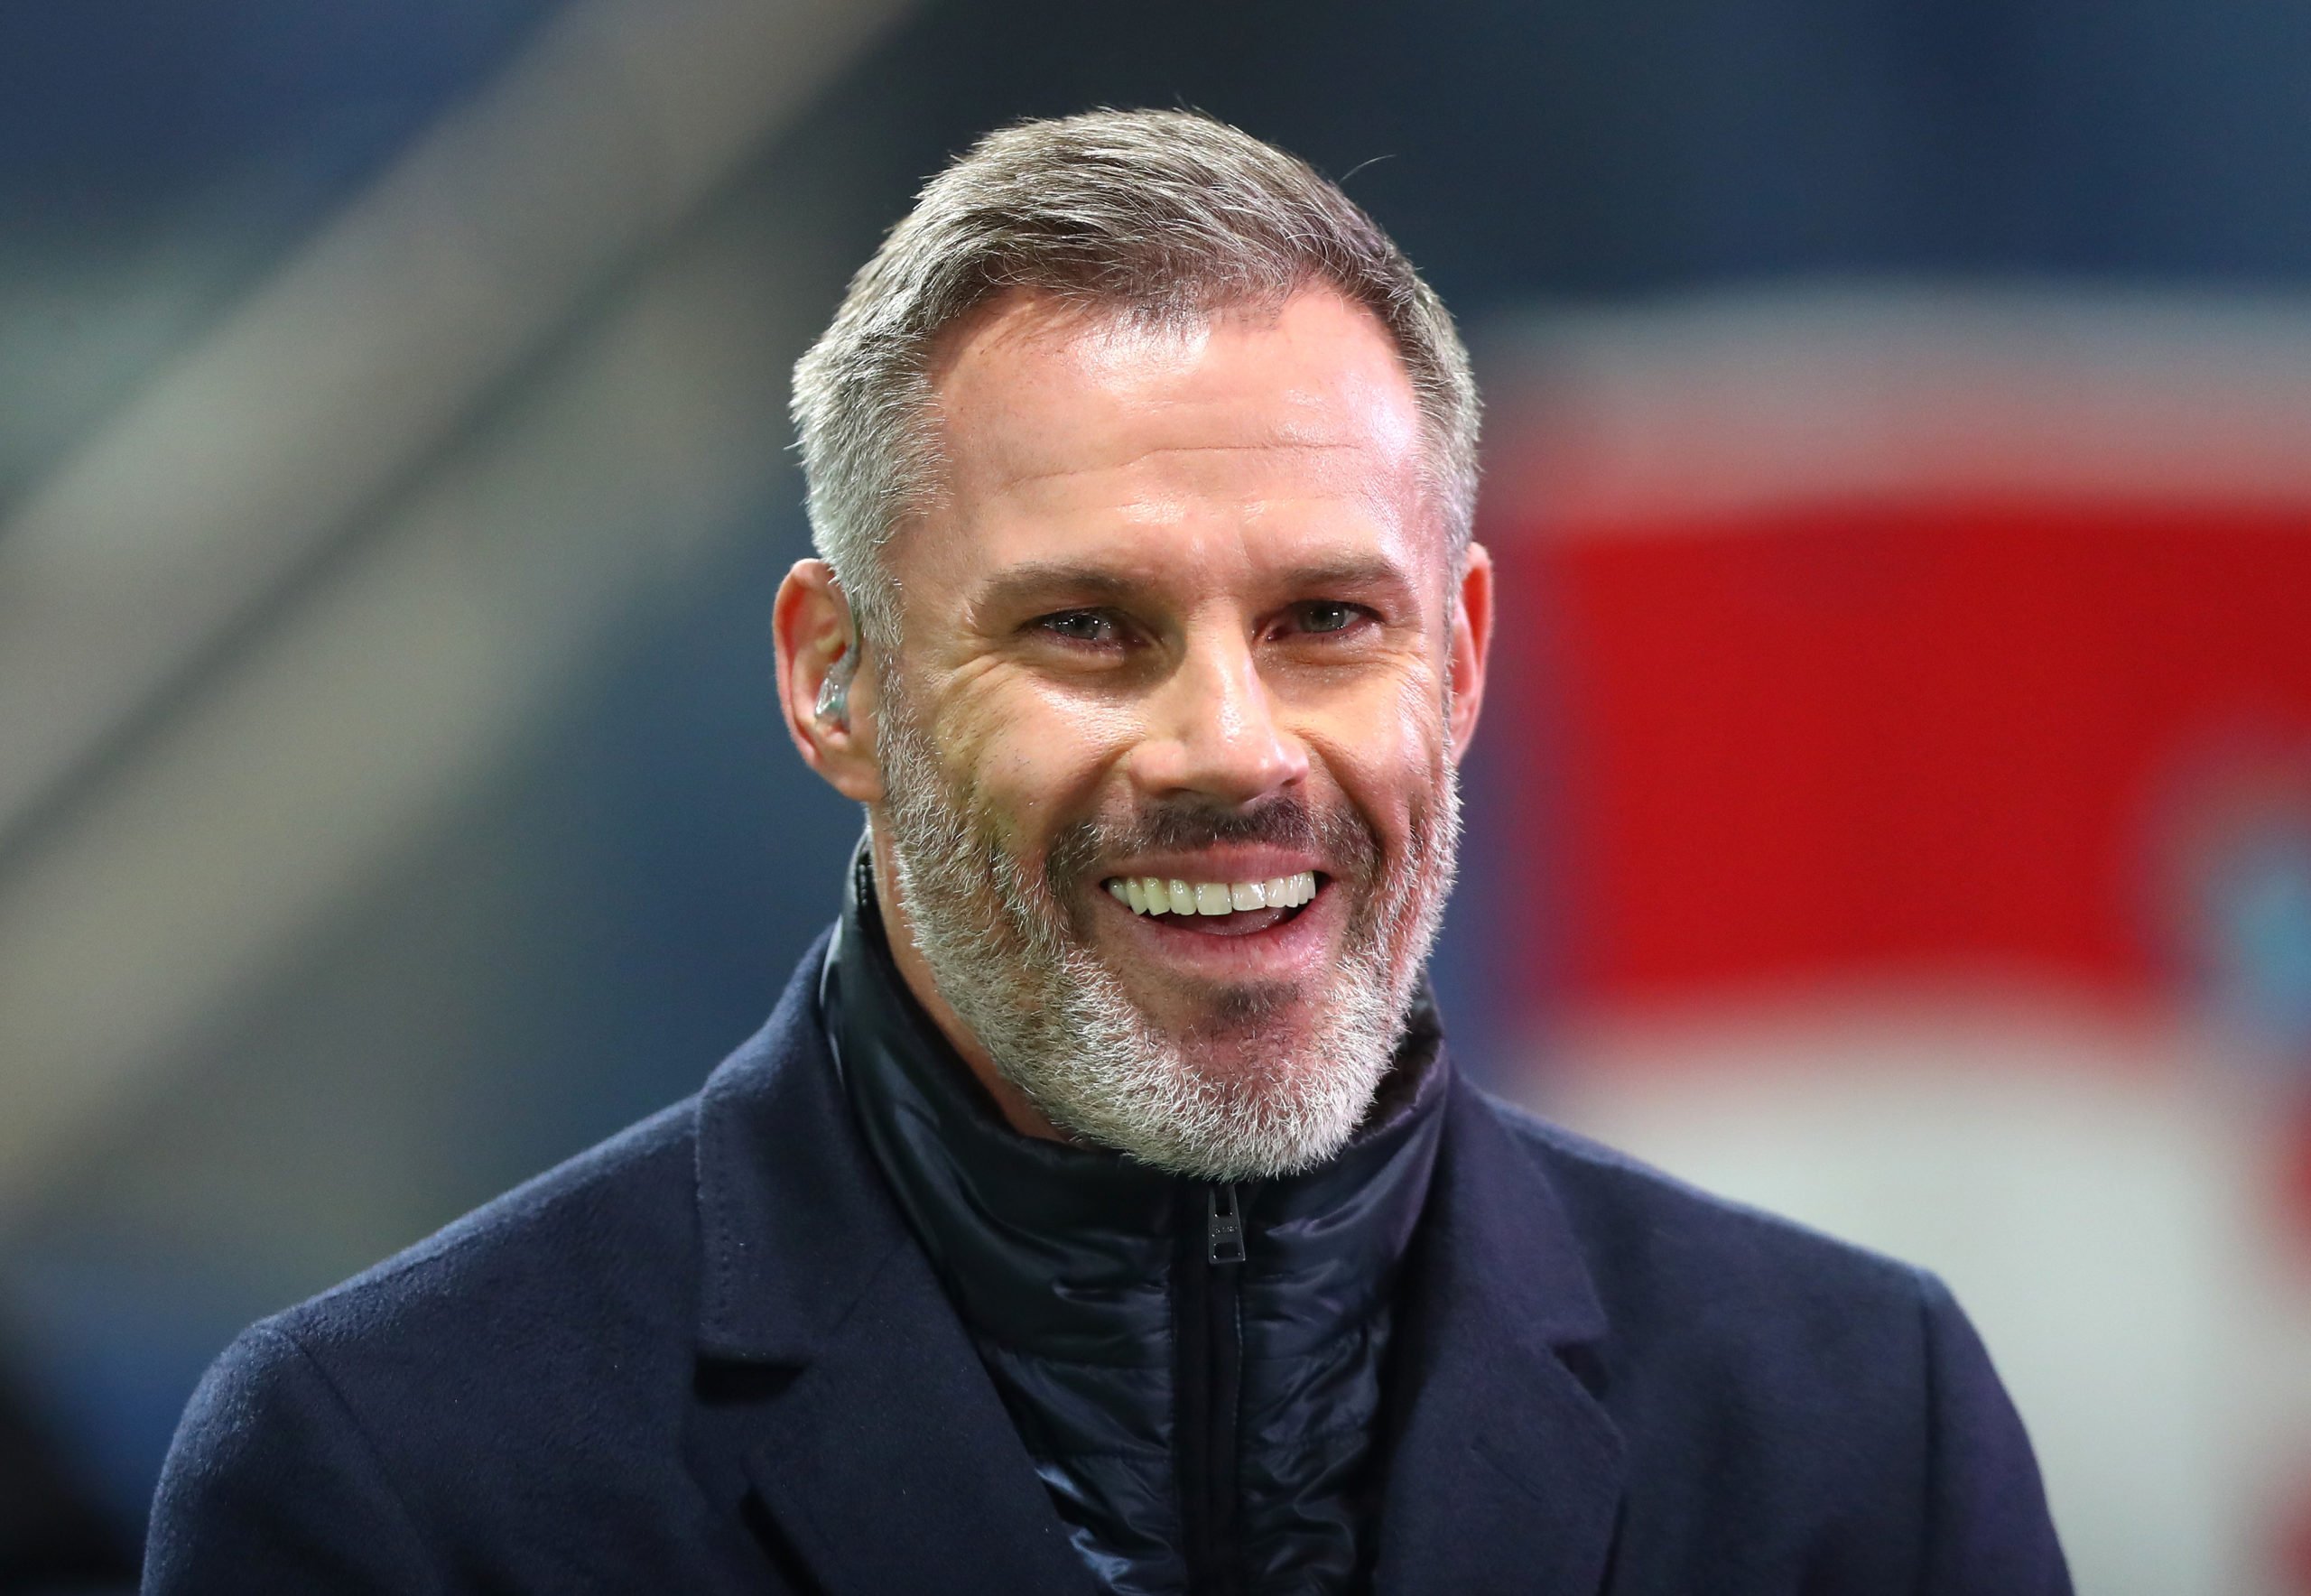 'The pace': Carragher claims £58k-a-week Chelsea player is so much quicker than 23-year-old Liverpool star